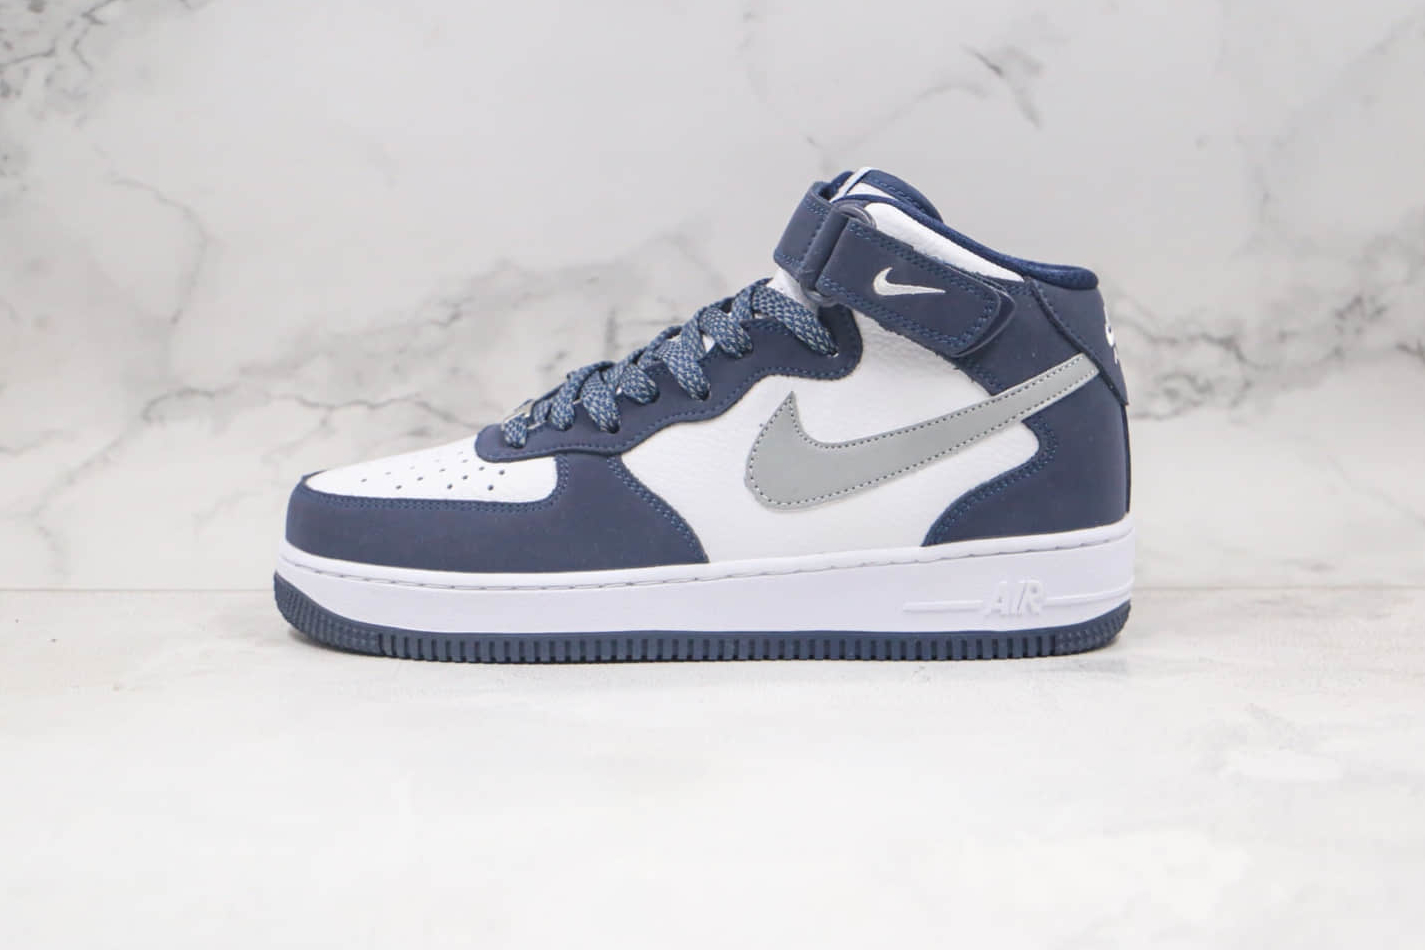 Nike Air Force 1 07 Mid Navy White Grey Blue Shoes AQ2263-115 - Stylish and Versatile Footwear